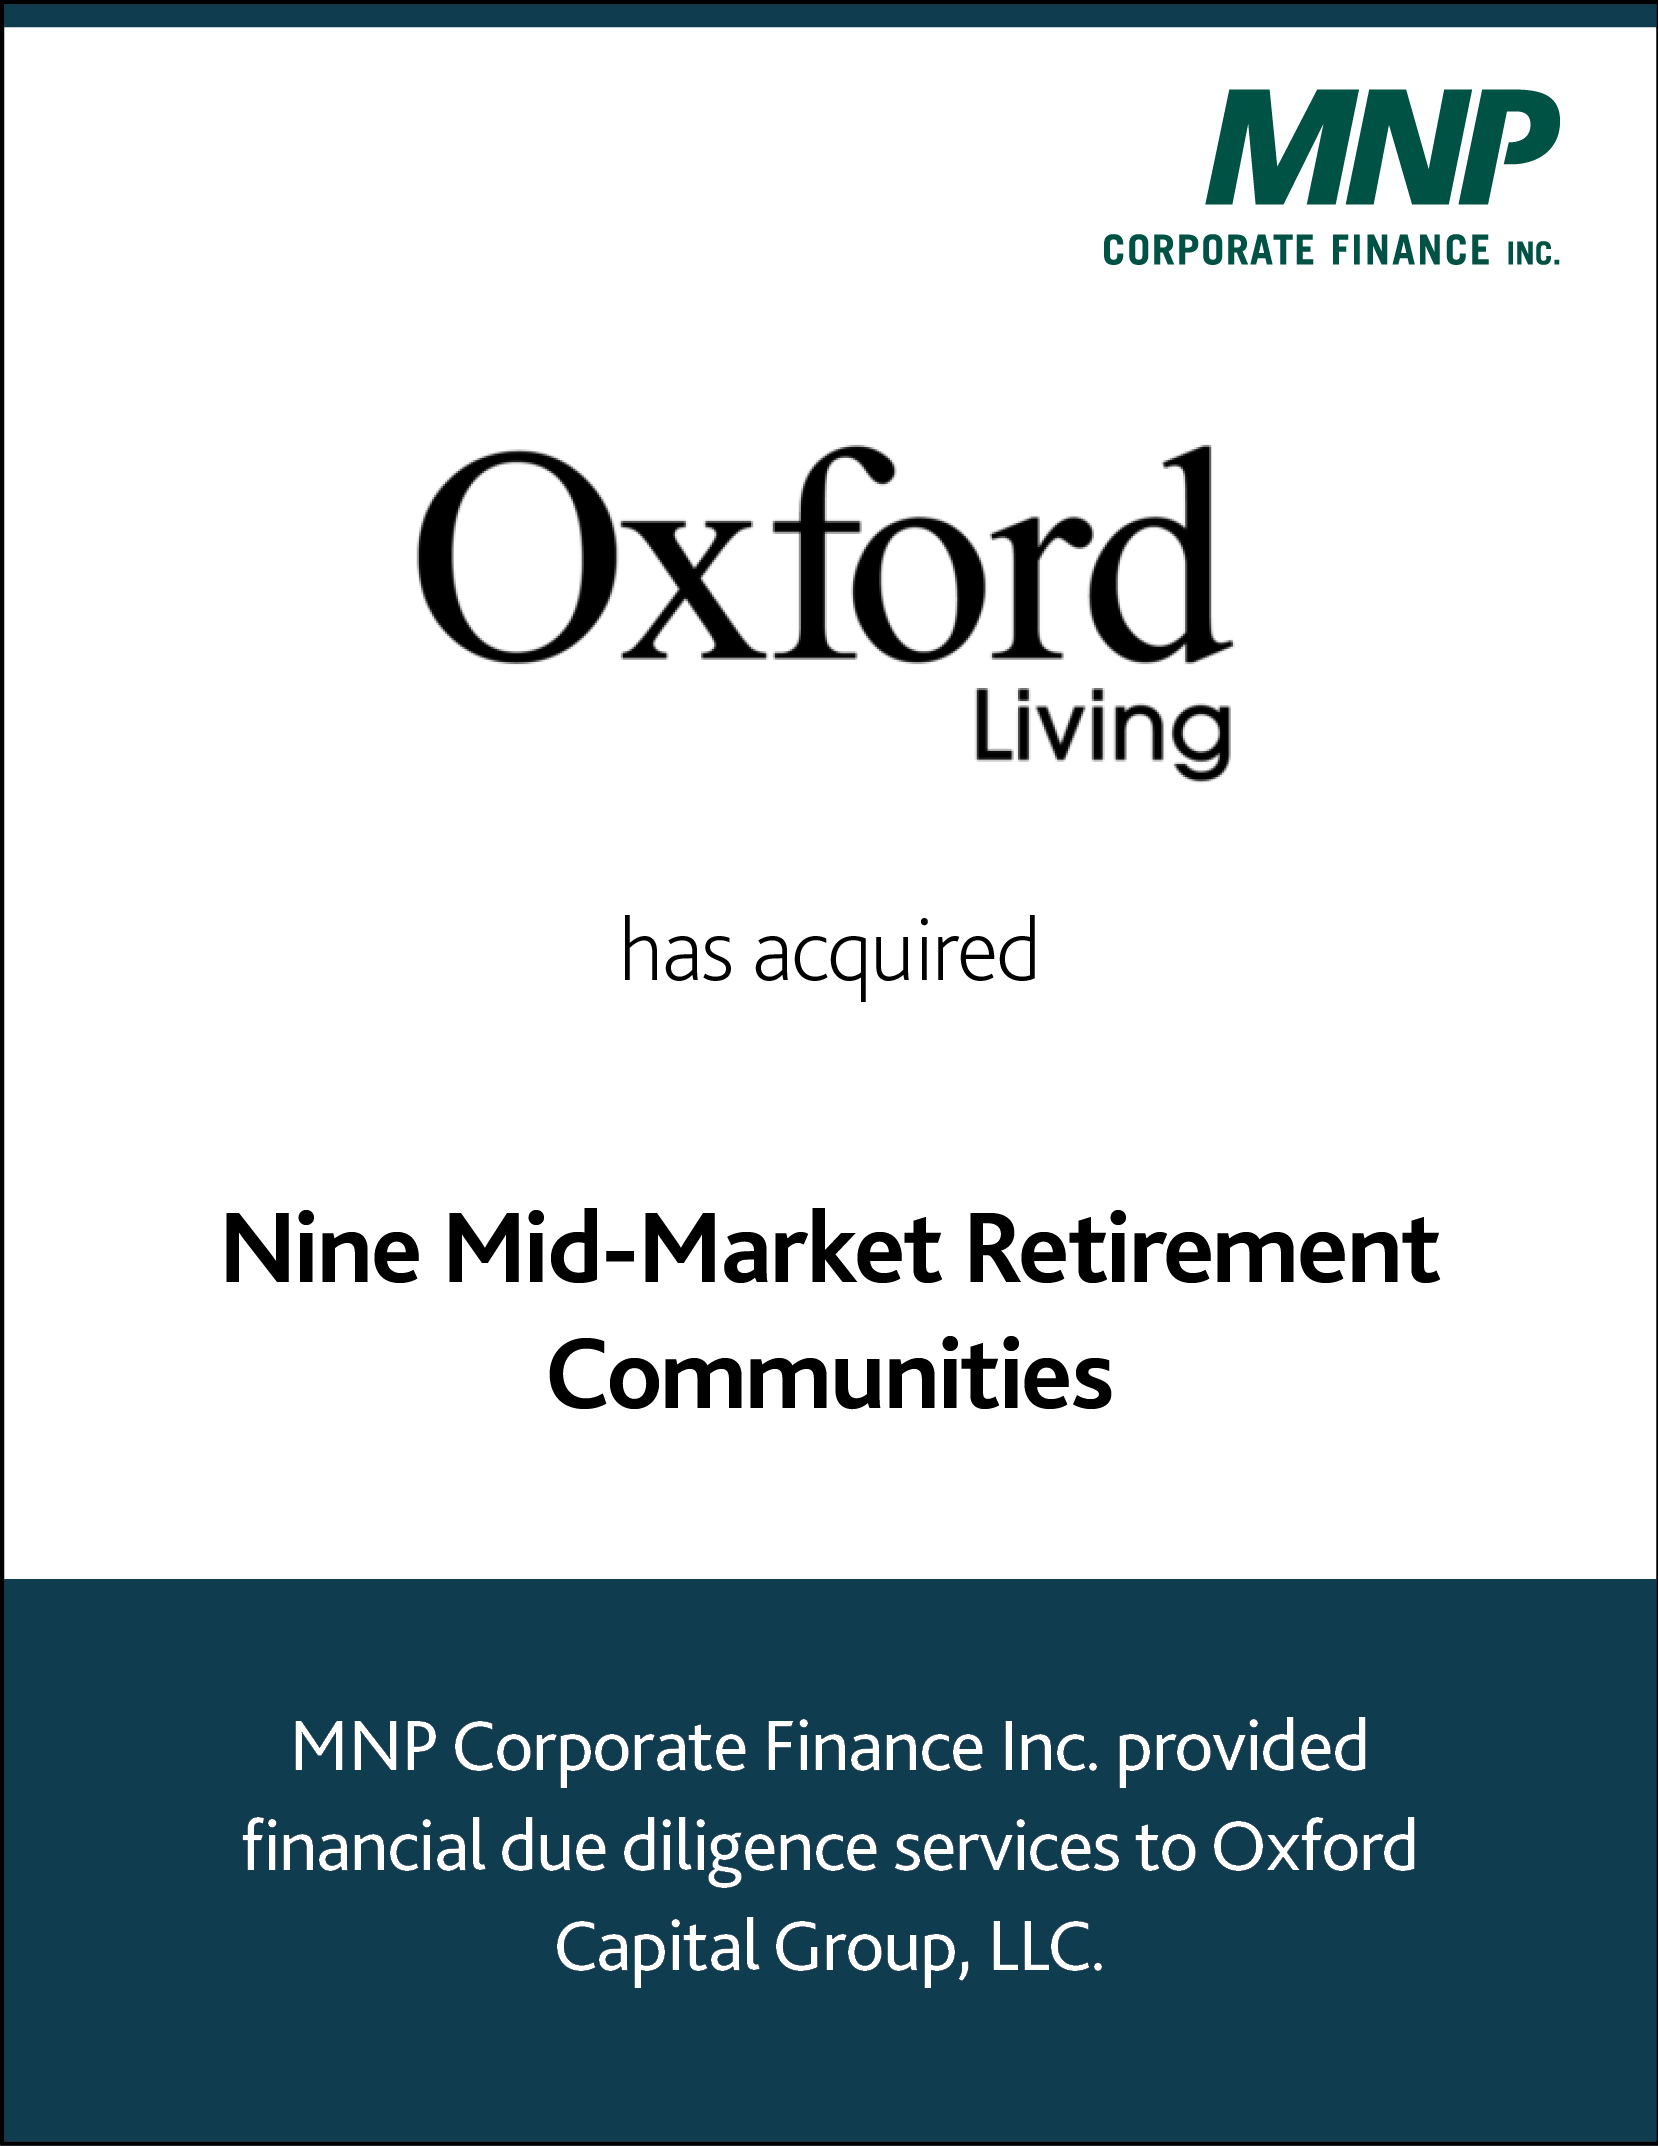 Oxford Living has acquired Nine Mid-Market Retirement Communities